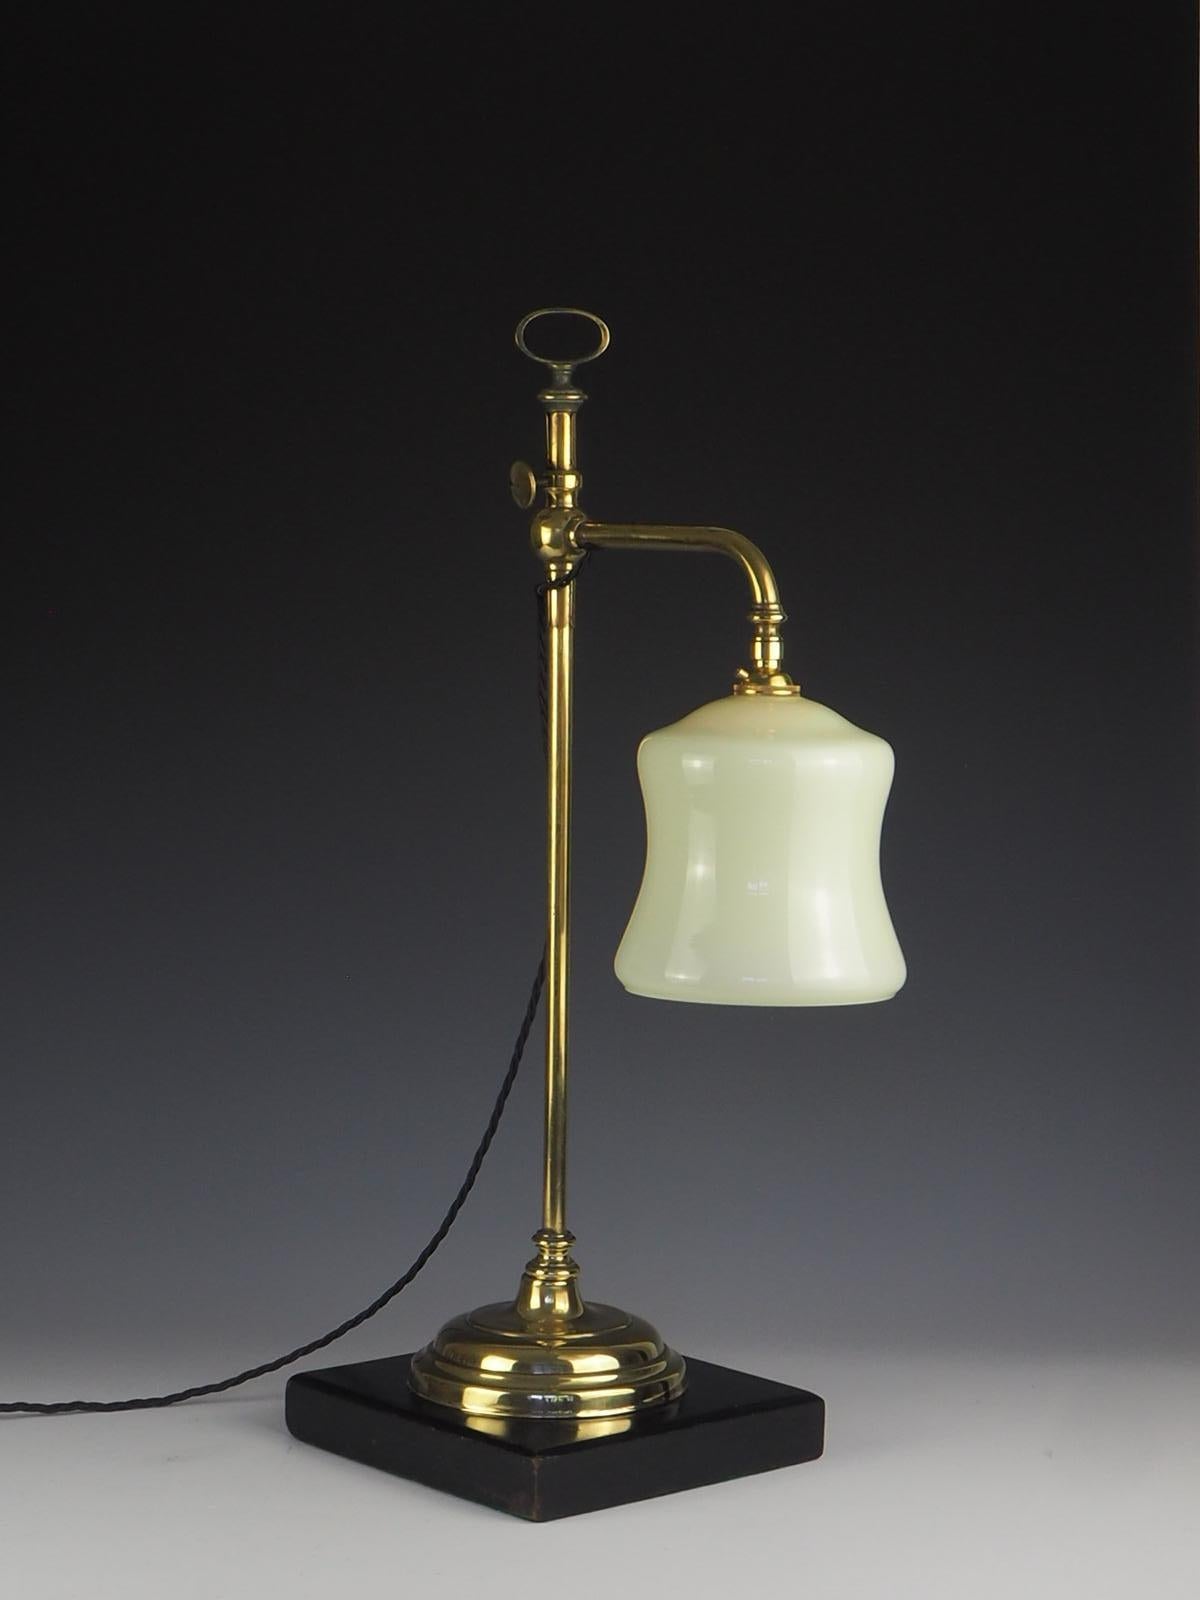 Antique 19th century rise and fall desk lamp.

Very heavy elegant desk lamp with solid ebonised wood base and brass rise and fall in working working order with beautiful opaline glass shade.

Original gas lamp now converted to electric.